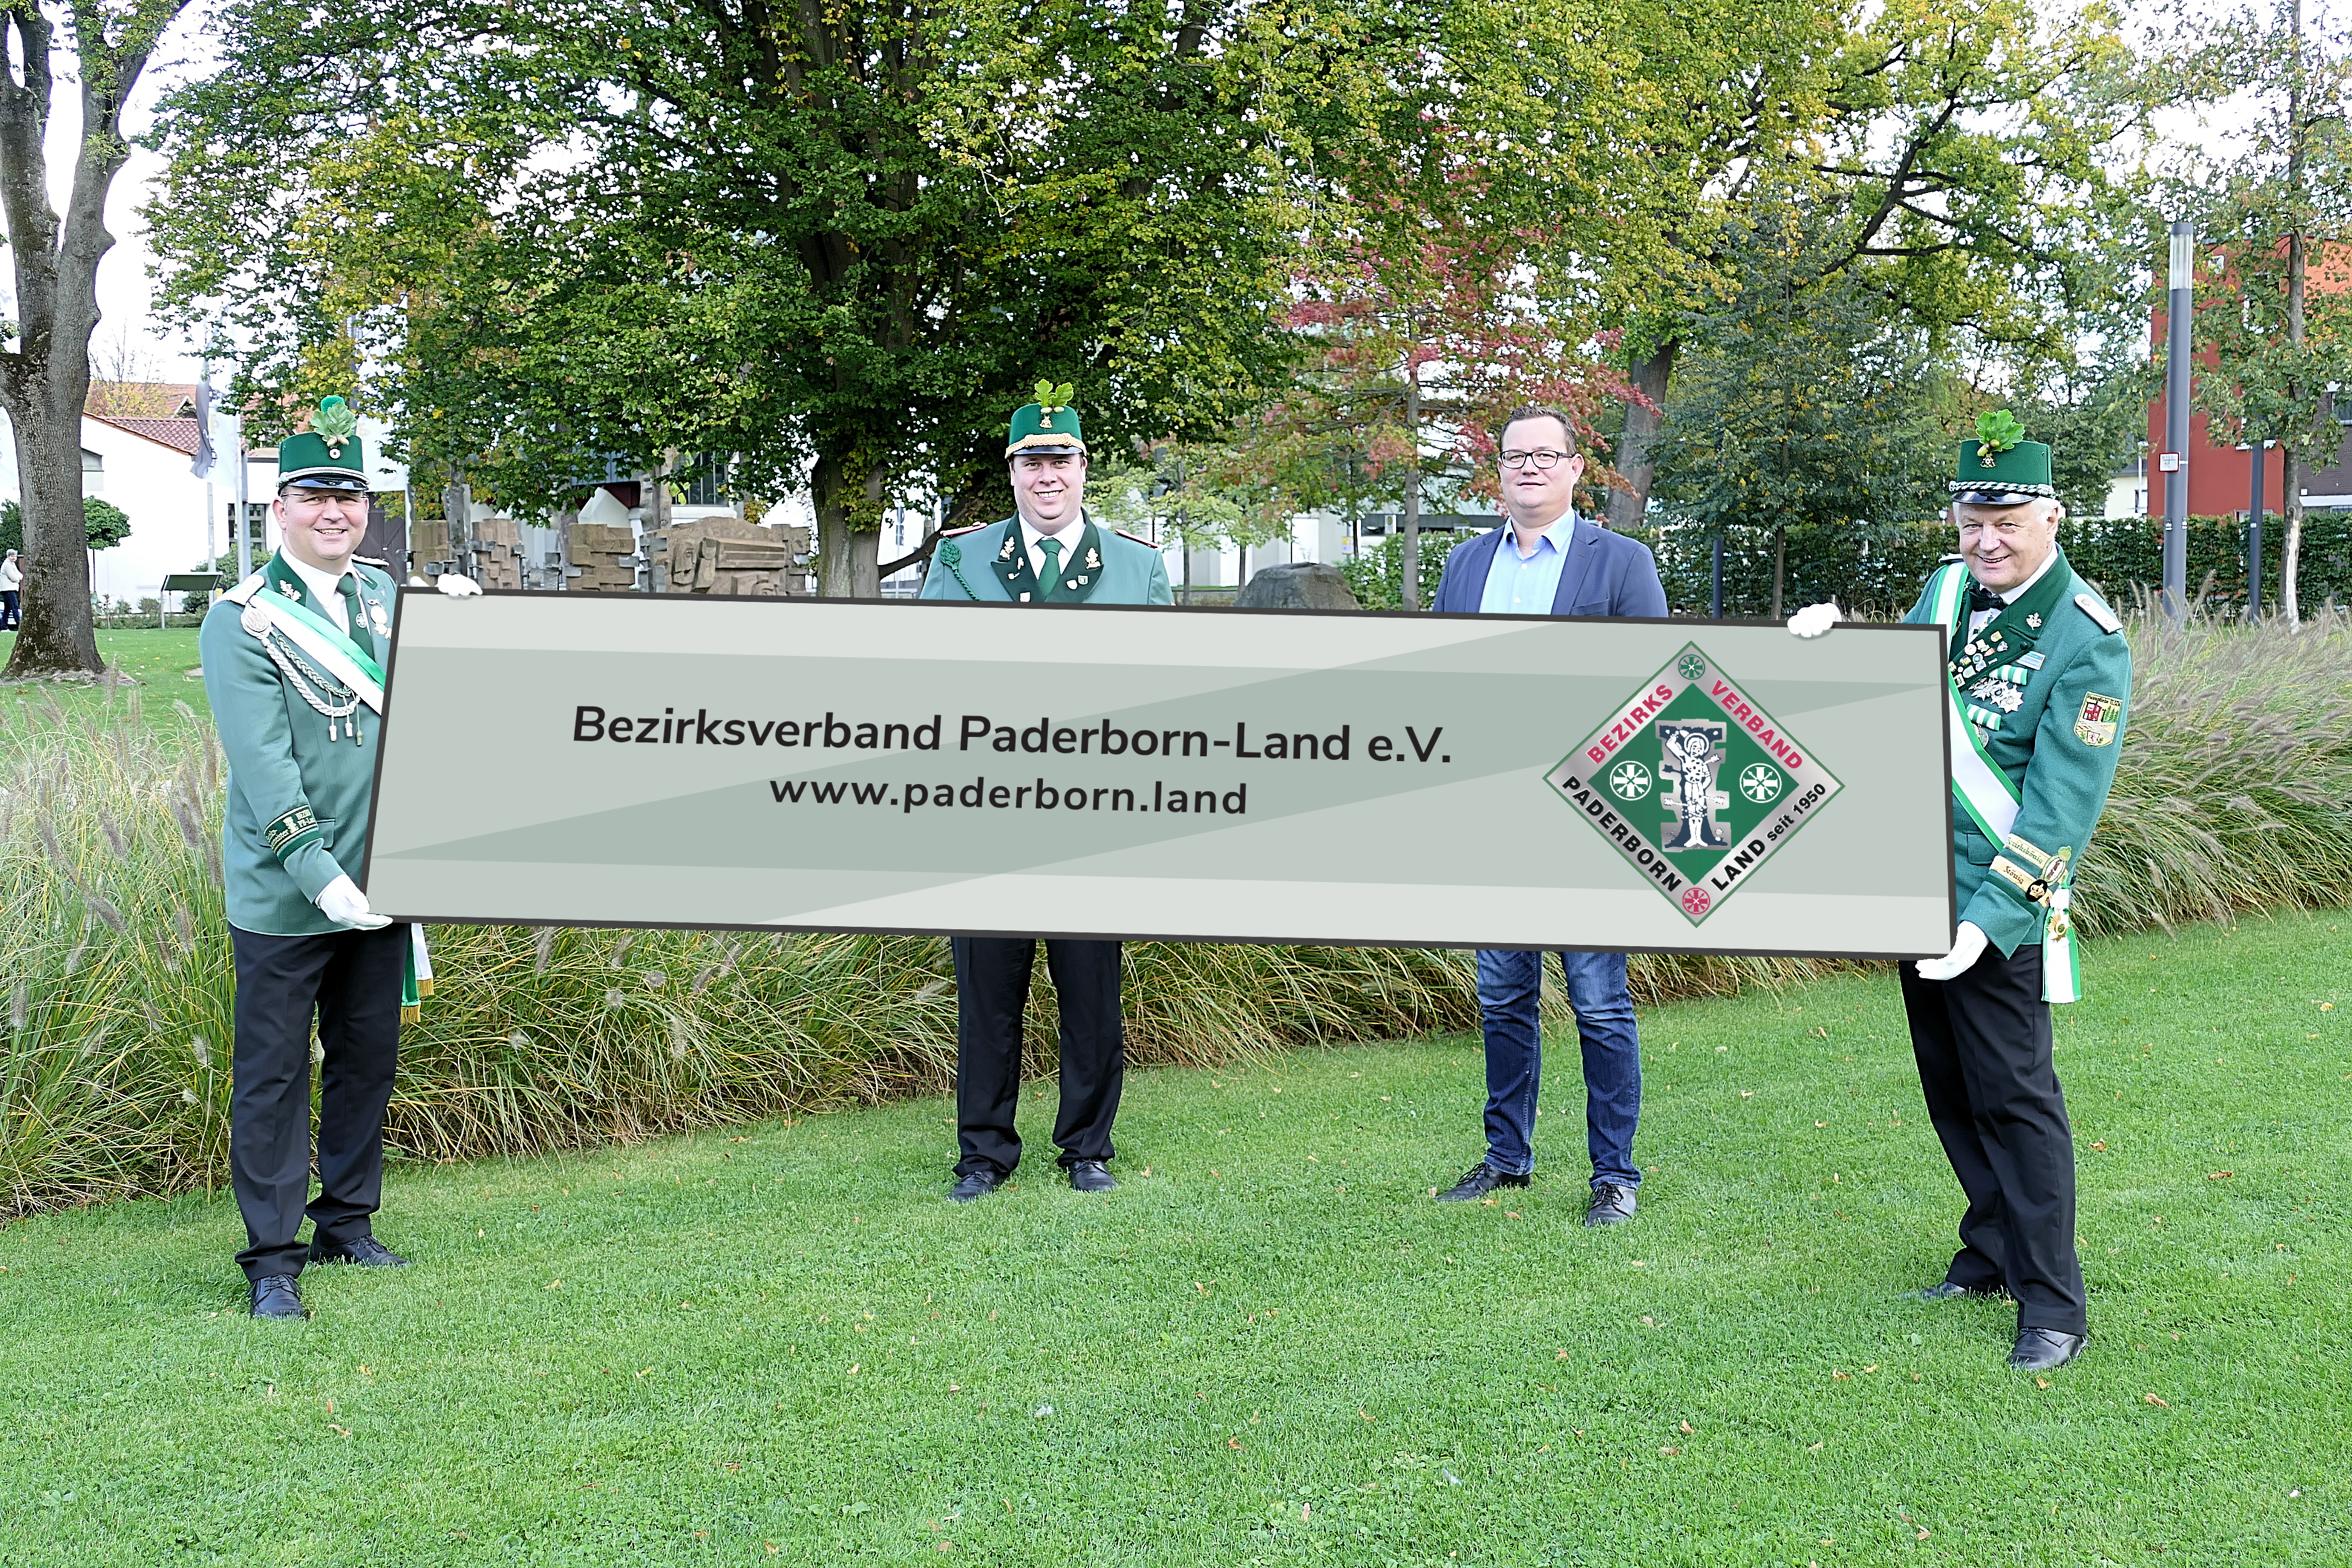 Bezirksverband in neuem Outfit